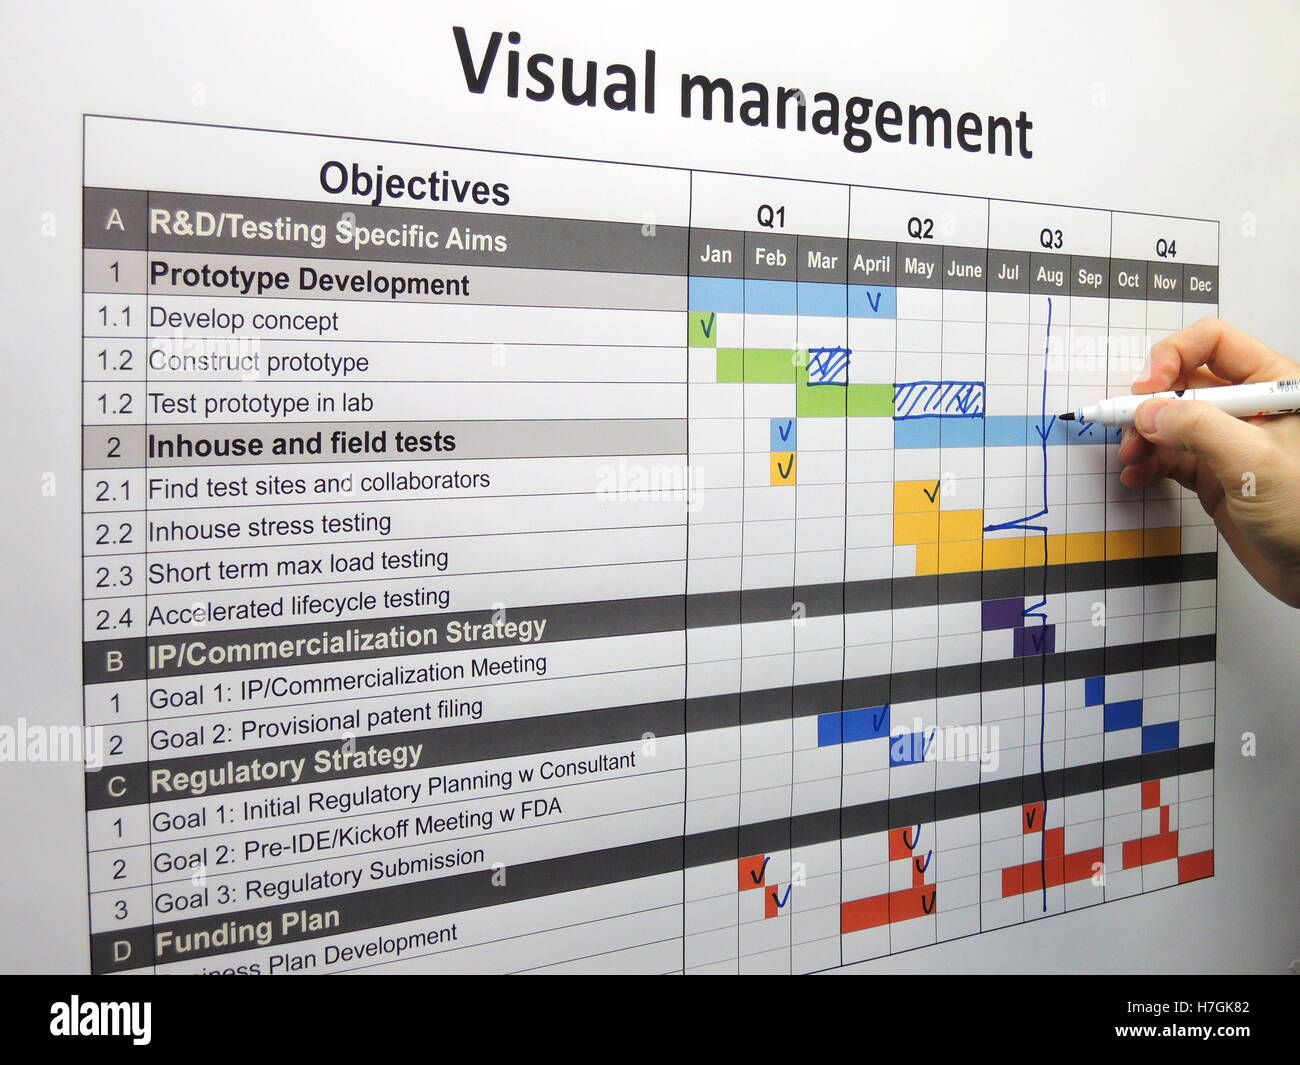 Updating the project plan using visual management. Done tasks and backspikes are shown. Stock Photo